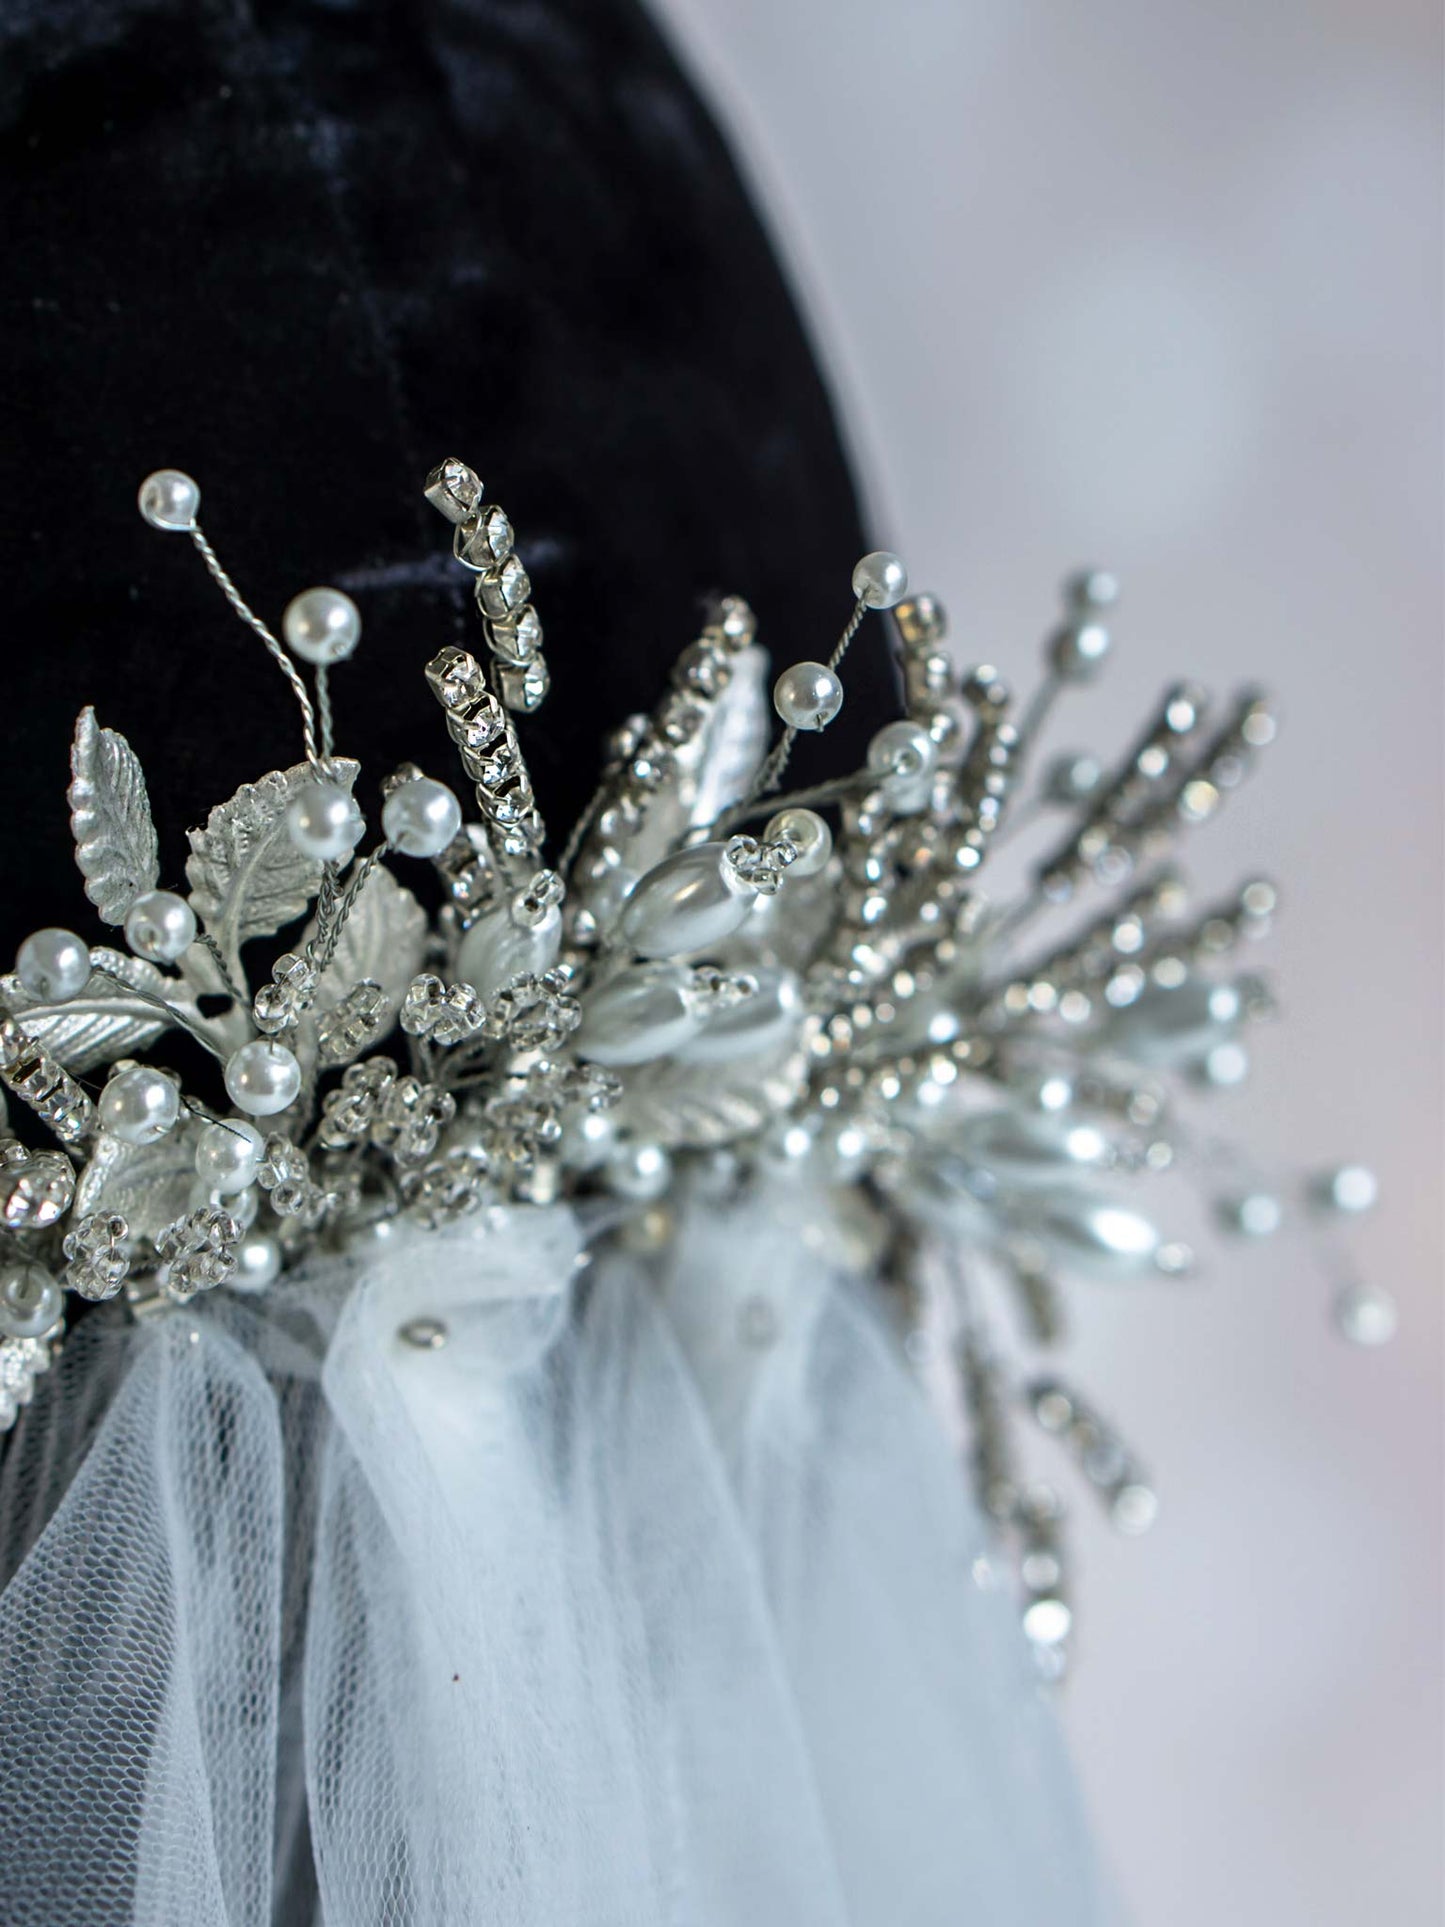 Exquisite Silver Rhinestone Hair Comb with Delicate Pearls | DiAmoreDS - Collection Meadow Symphony